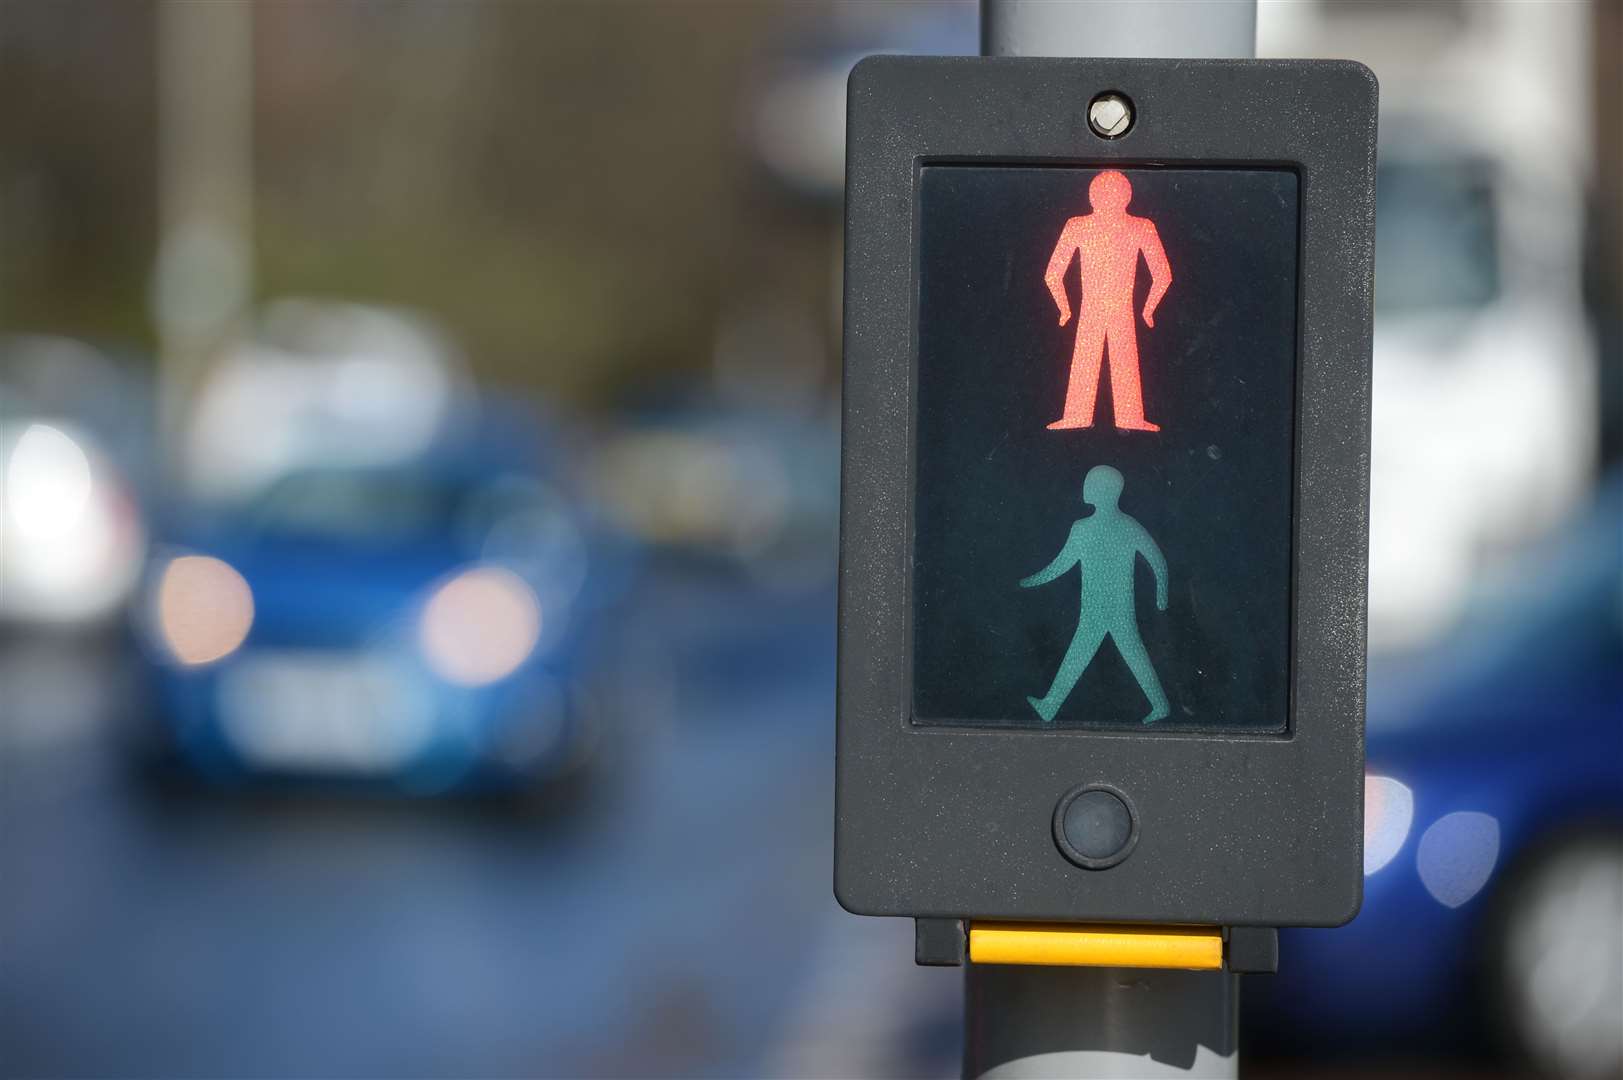 New pedestrian crossings will be installed in Glenurquhart Road, Inverness.